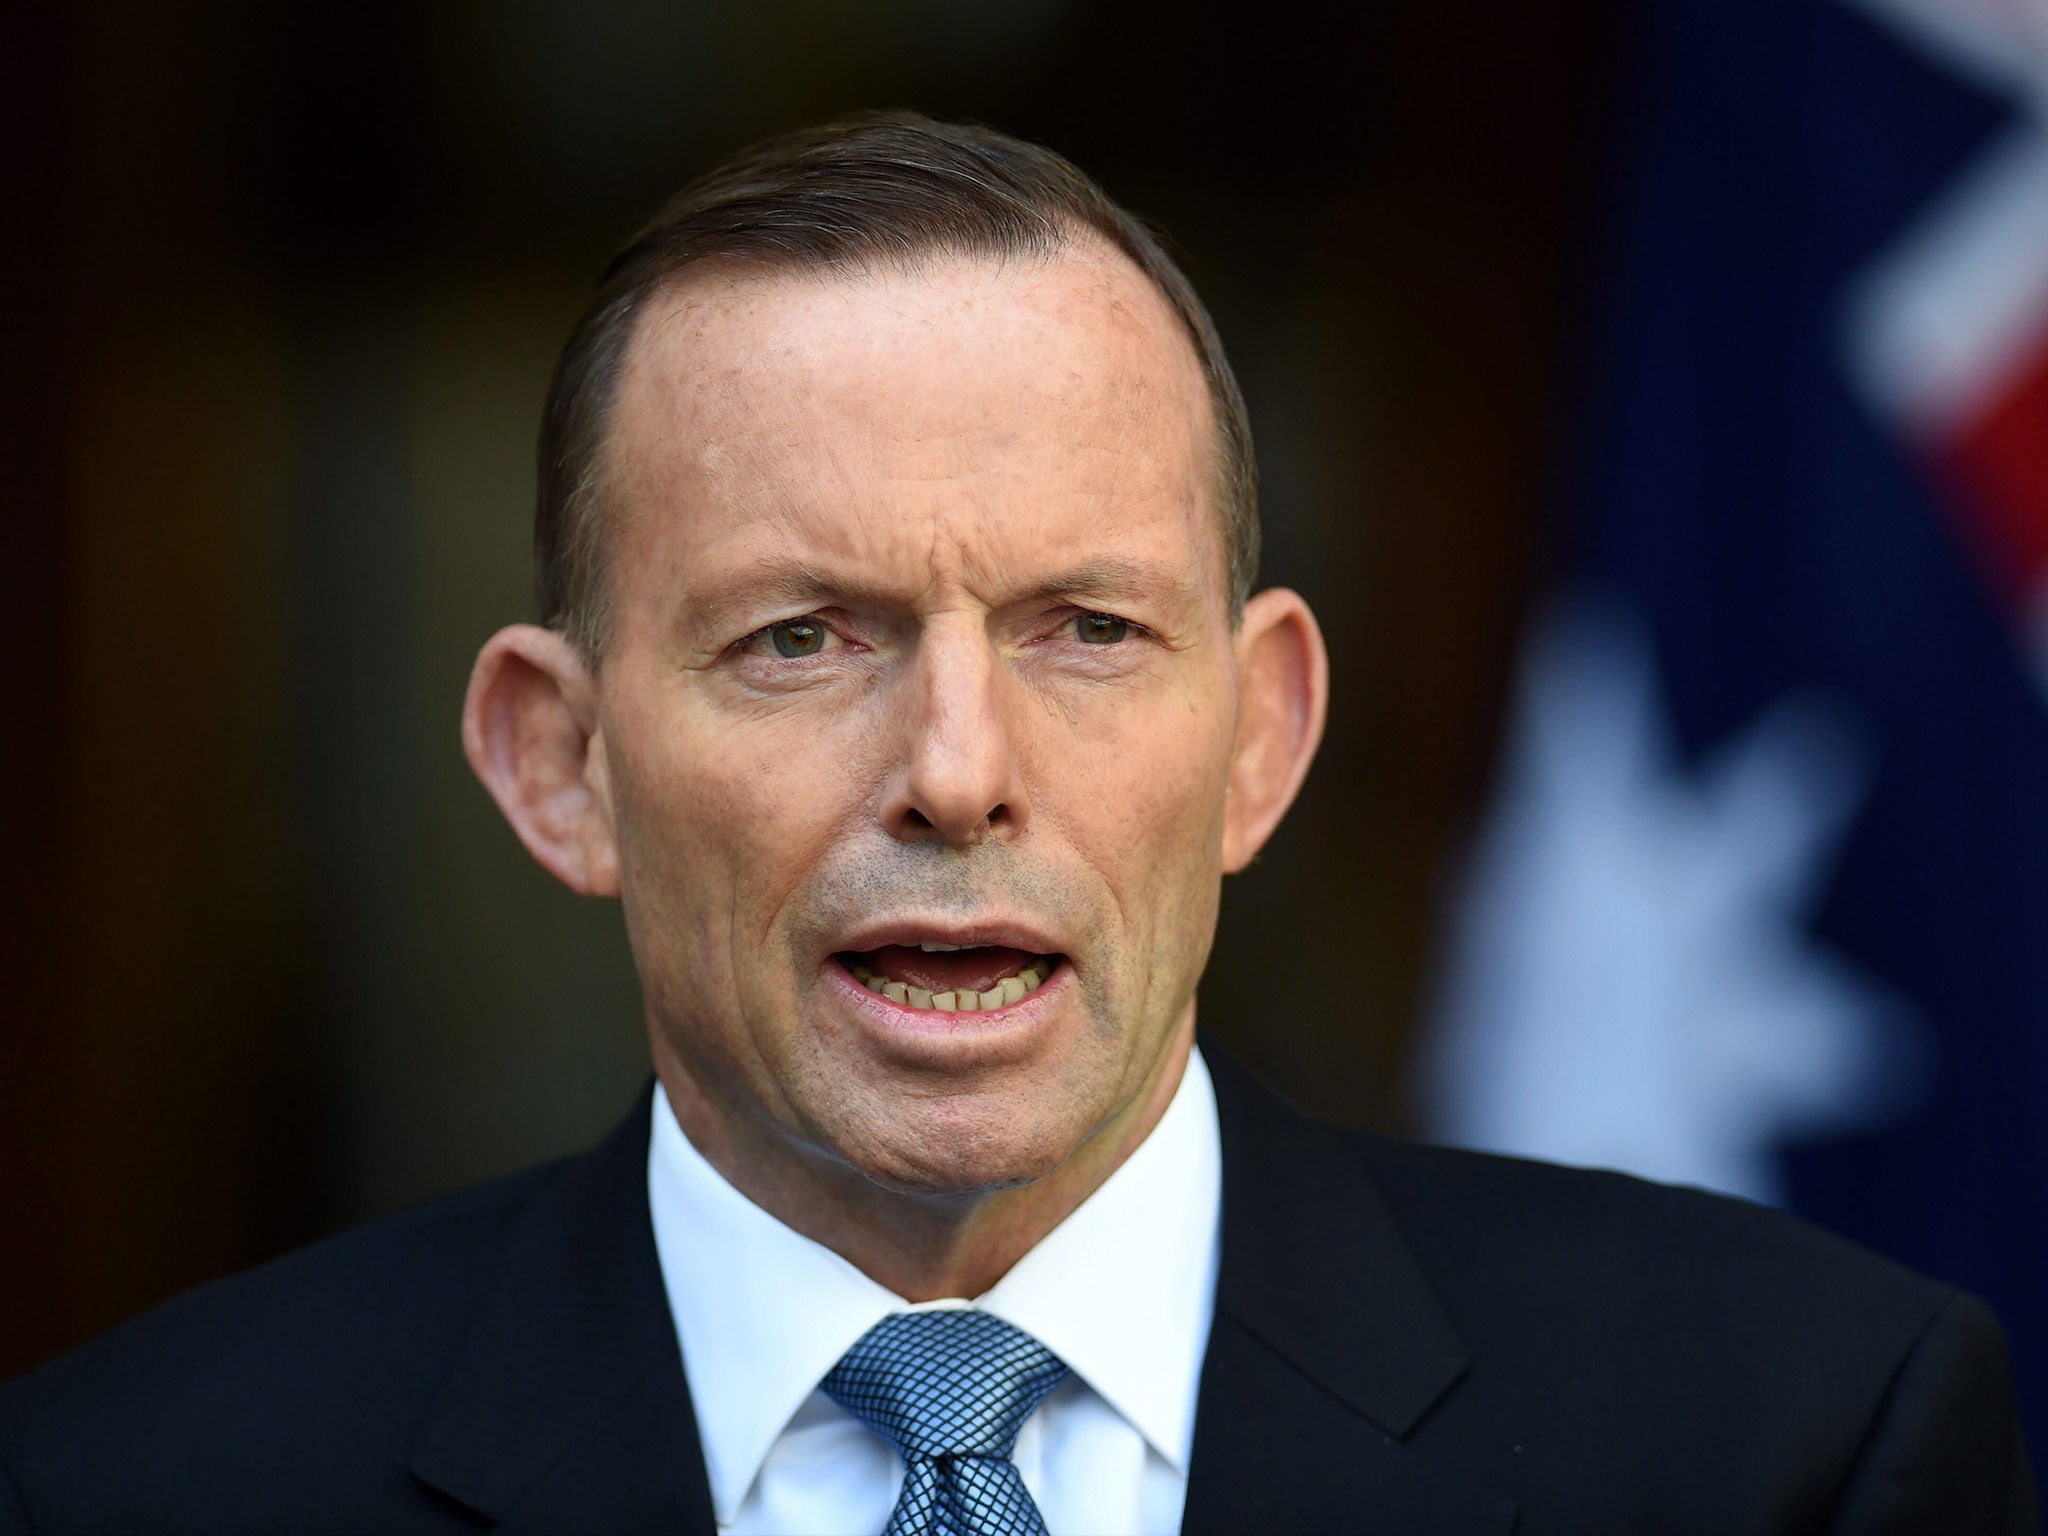 Prime Minister Tony Abbott, who trained as a Catholic priest, personally opposes gay marriage